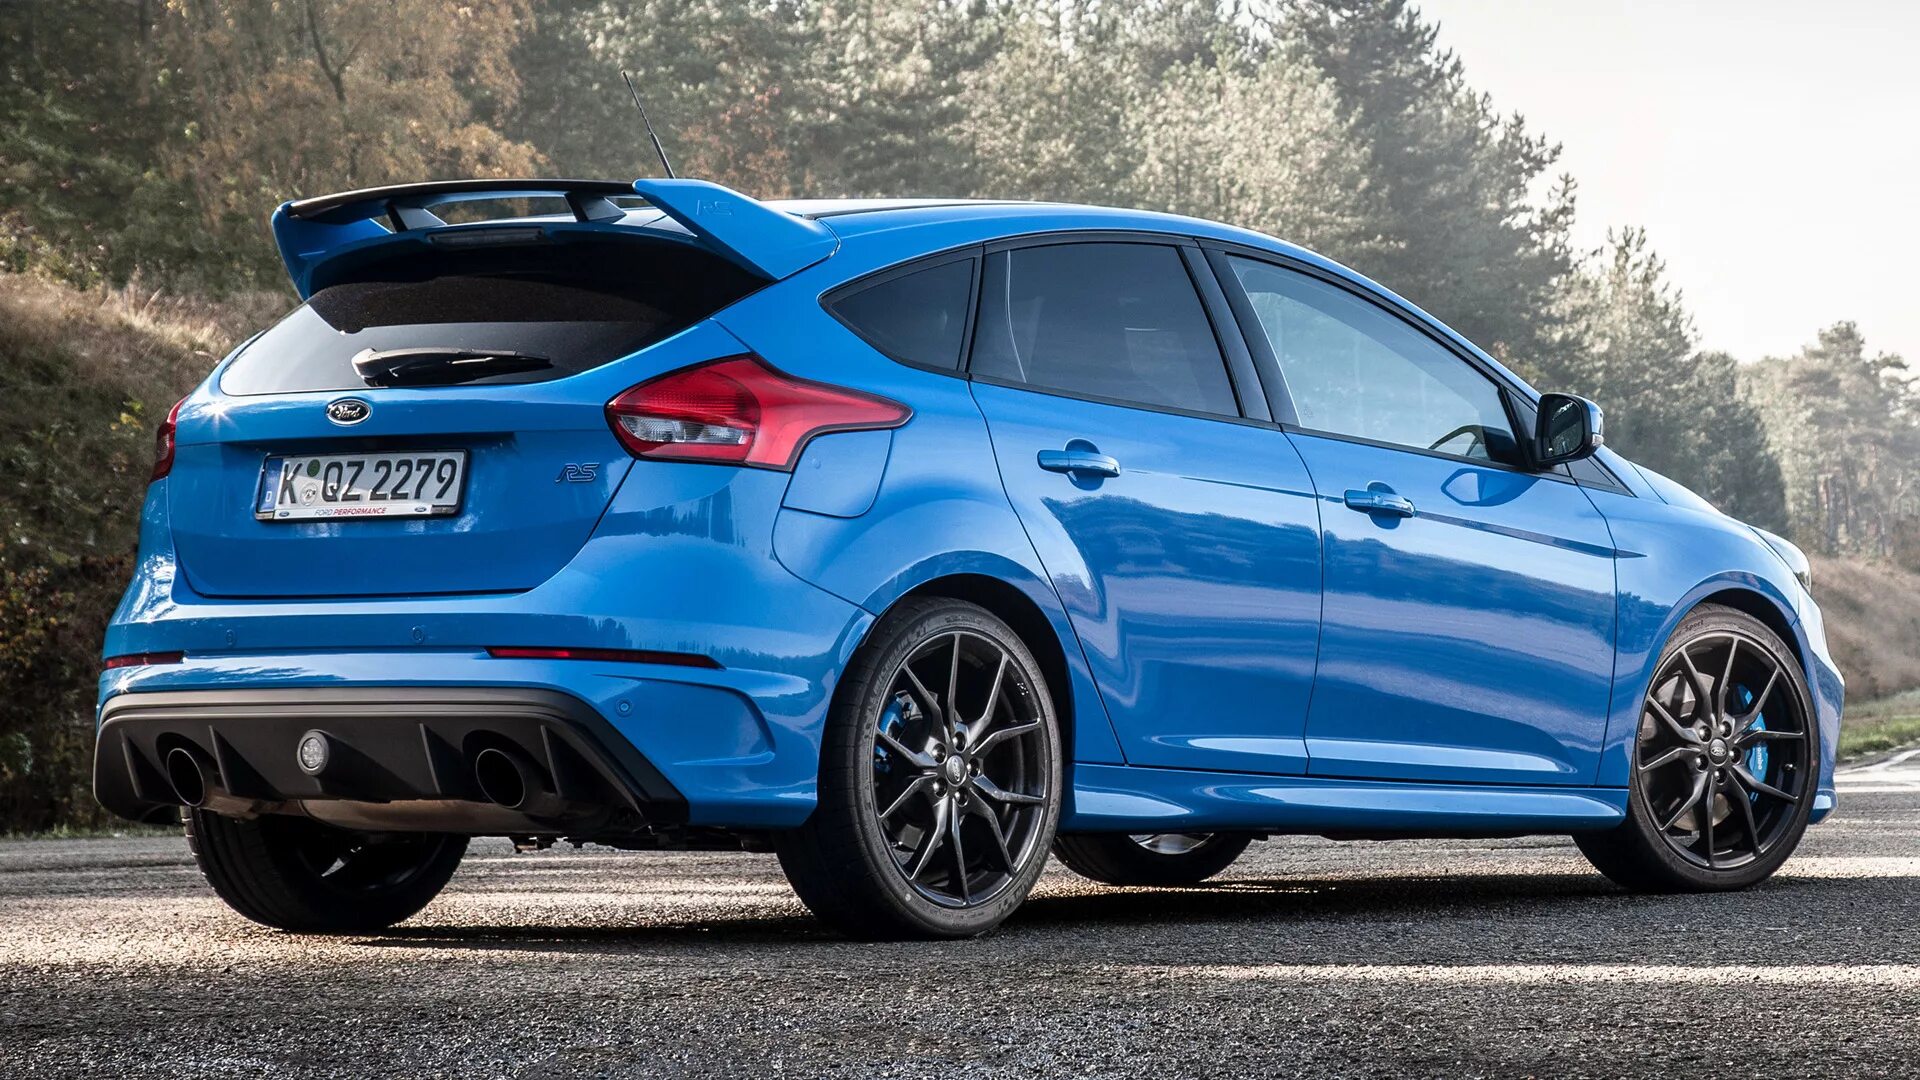 Ford Focus RS 2016. Форд фокус 3 РС. Ford Focus RS 2014. Ford Focus RS 2017. Форд фокус 3 количество